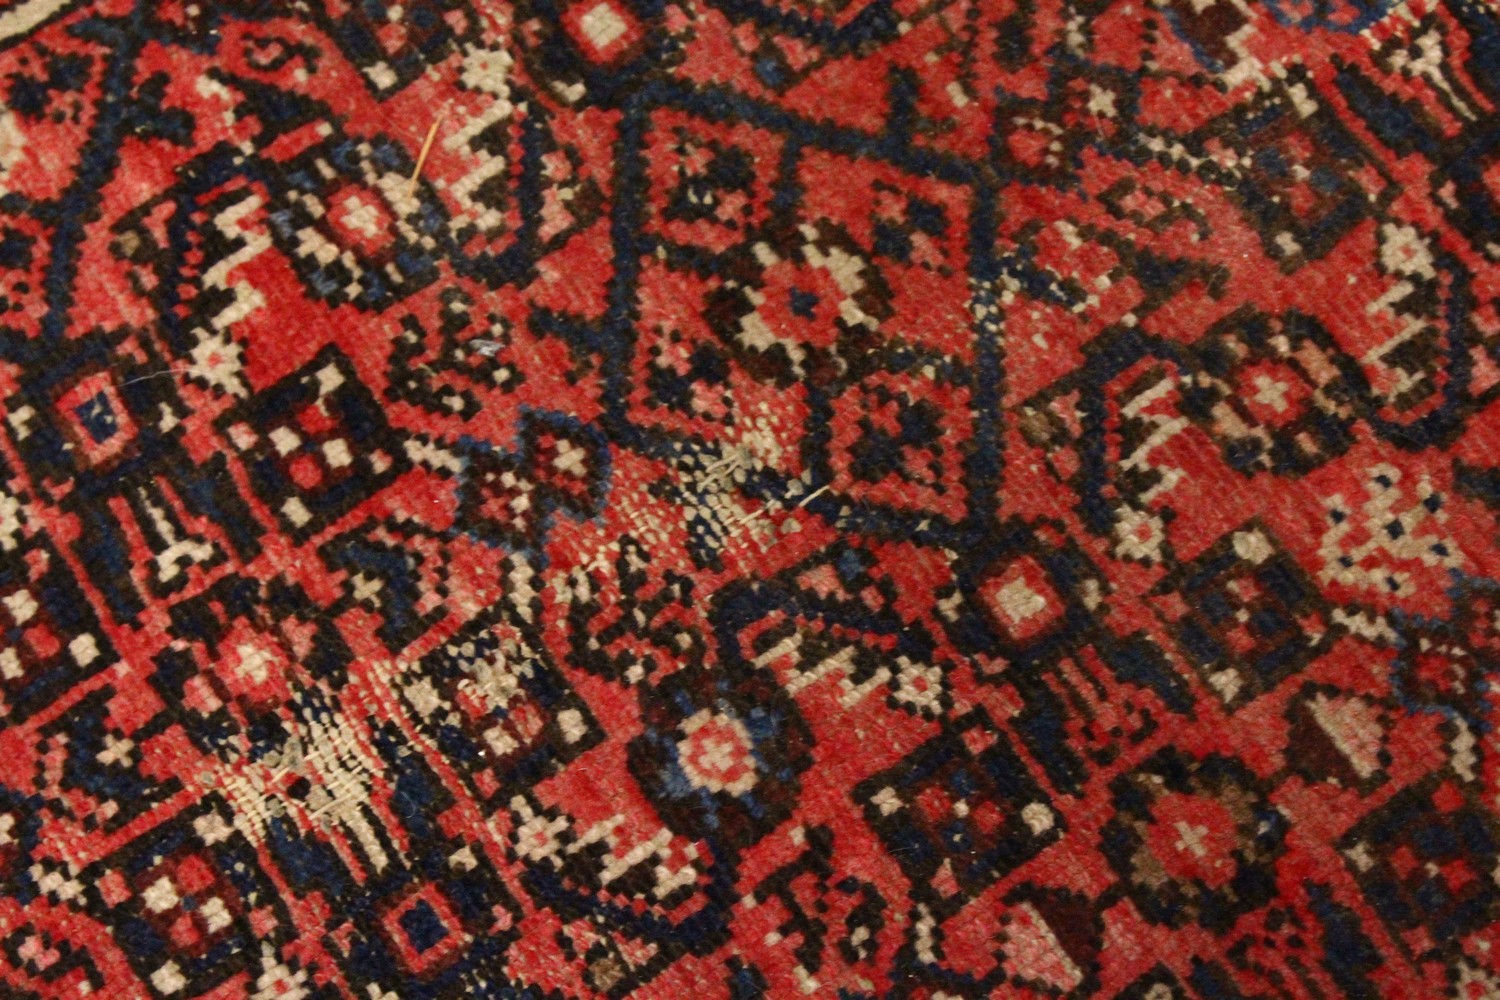 A PERSIAN RUG, 20TH CENTURY, red ground with central medallion, within a dark blue border. 6ft 10ins - Image 7 of 9